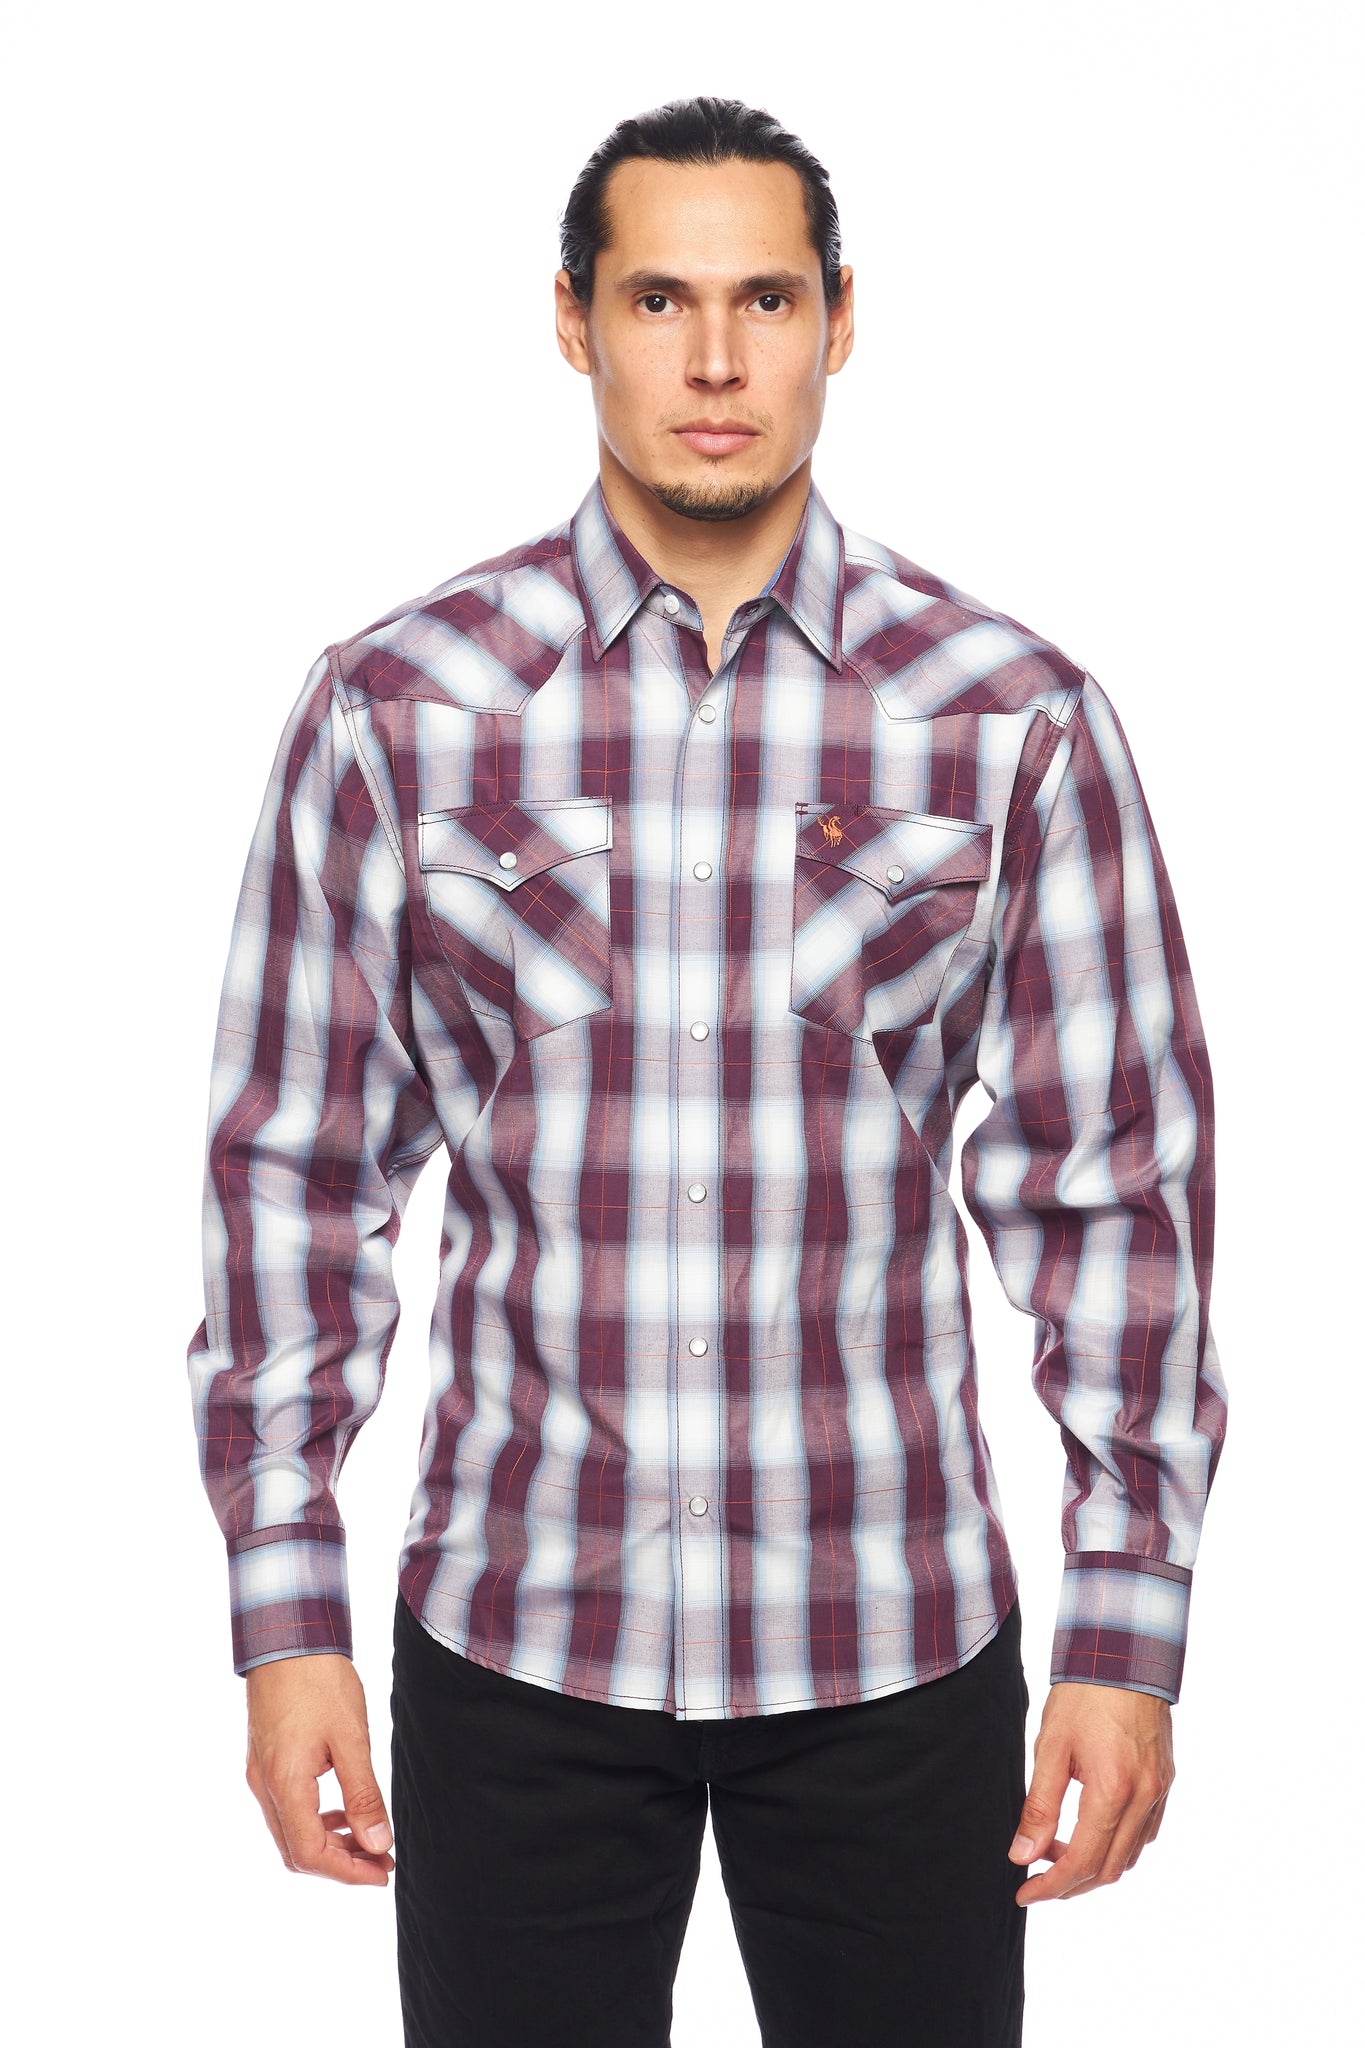 Men's Western Long Sleeve Plaid Shirts With Snap Buttons